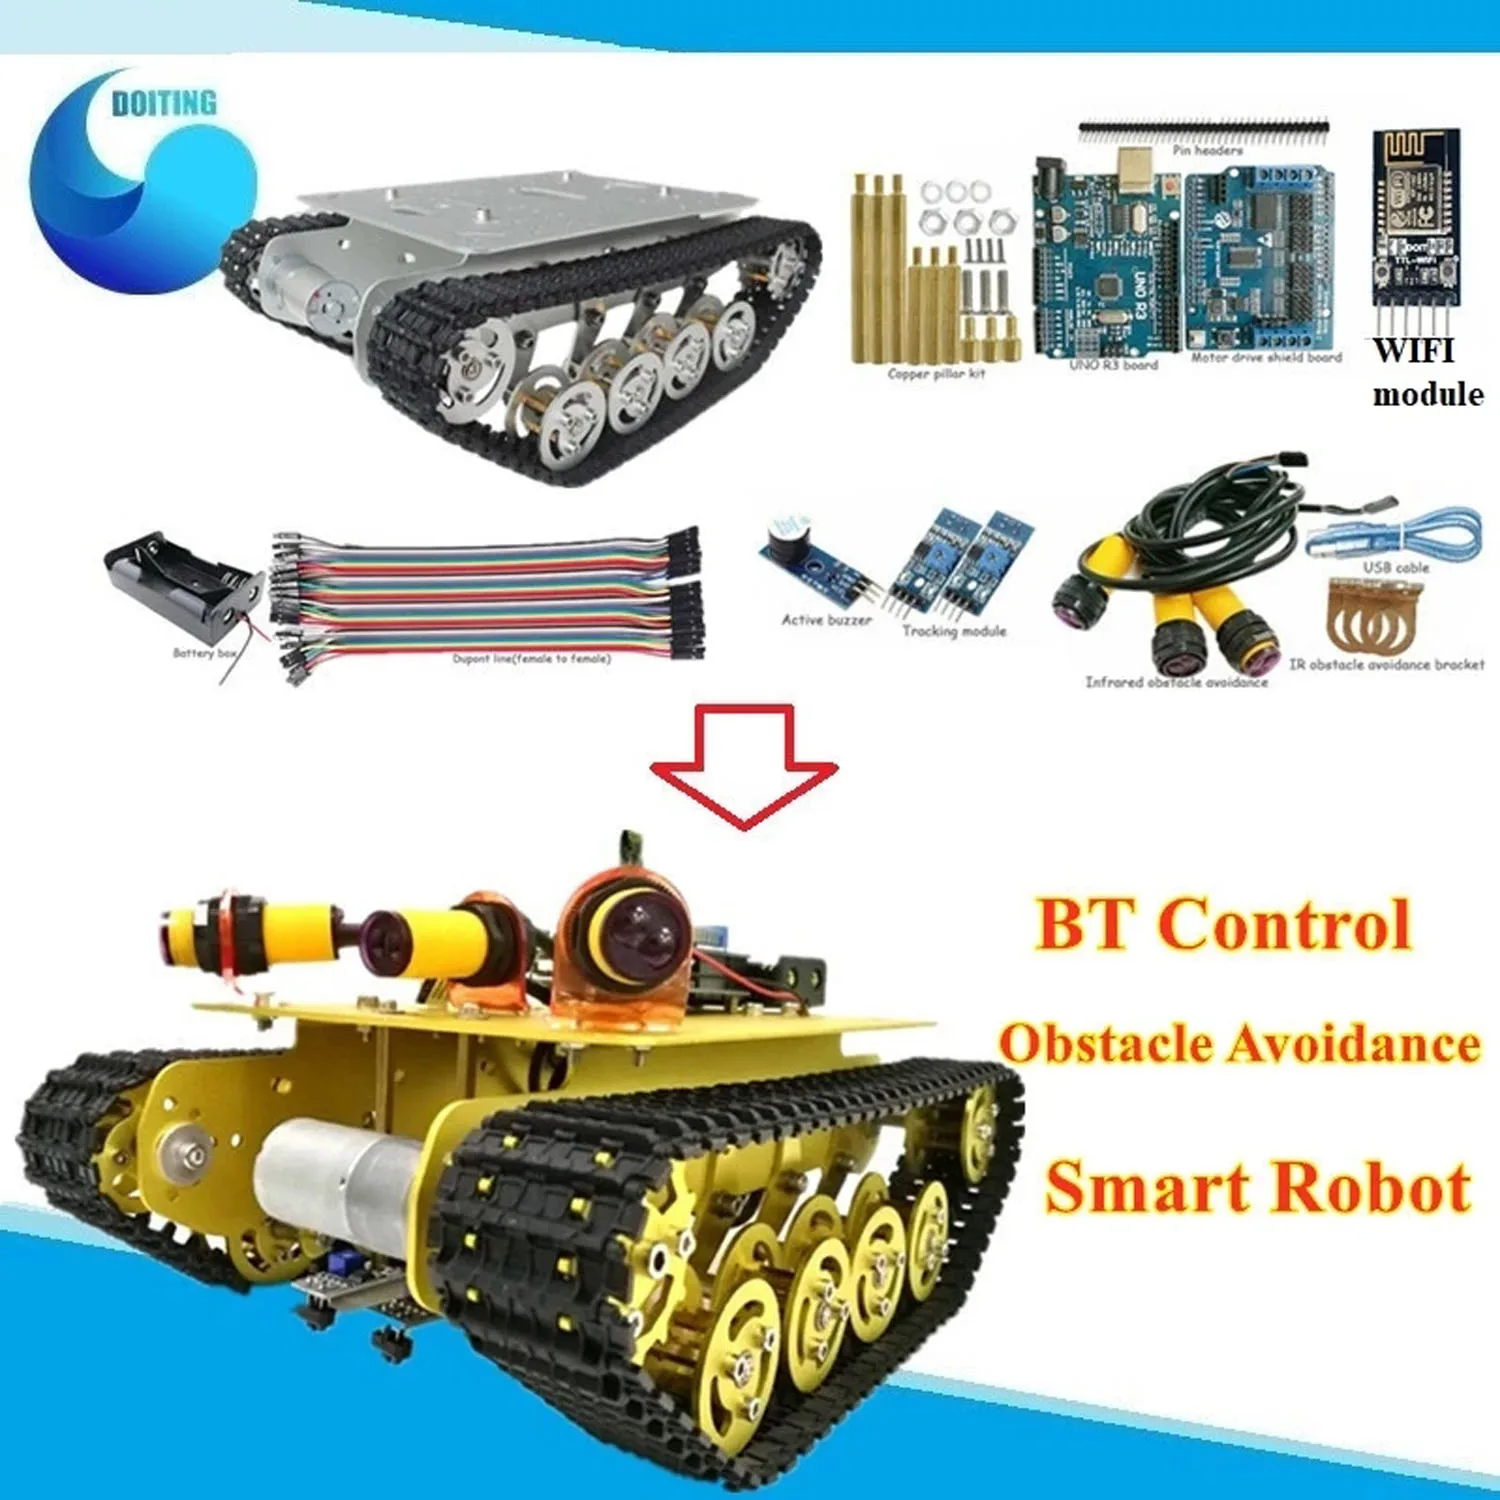 

TS100 Bluetooth Control Obstacle Avoidance Robot Tank Chassis Shock absorbing Crawler Car Mobile Robot Controled by Phone